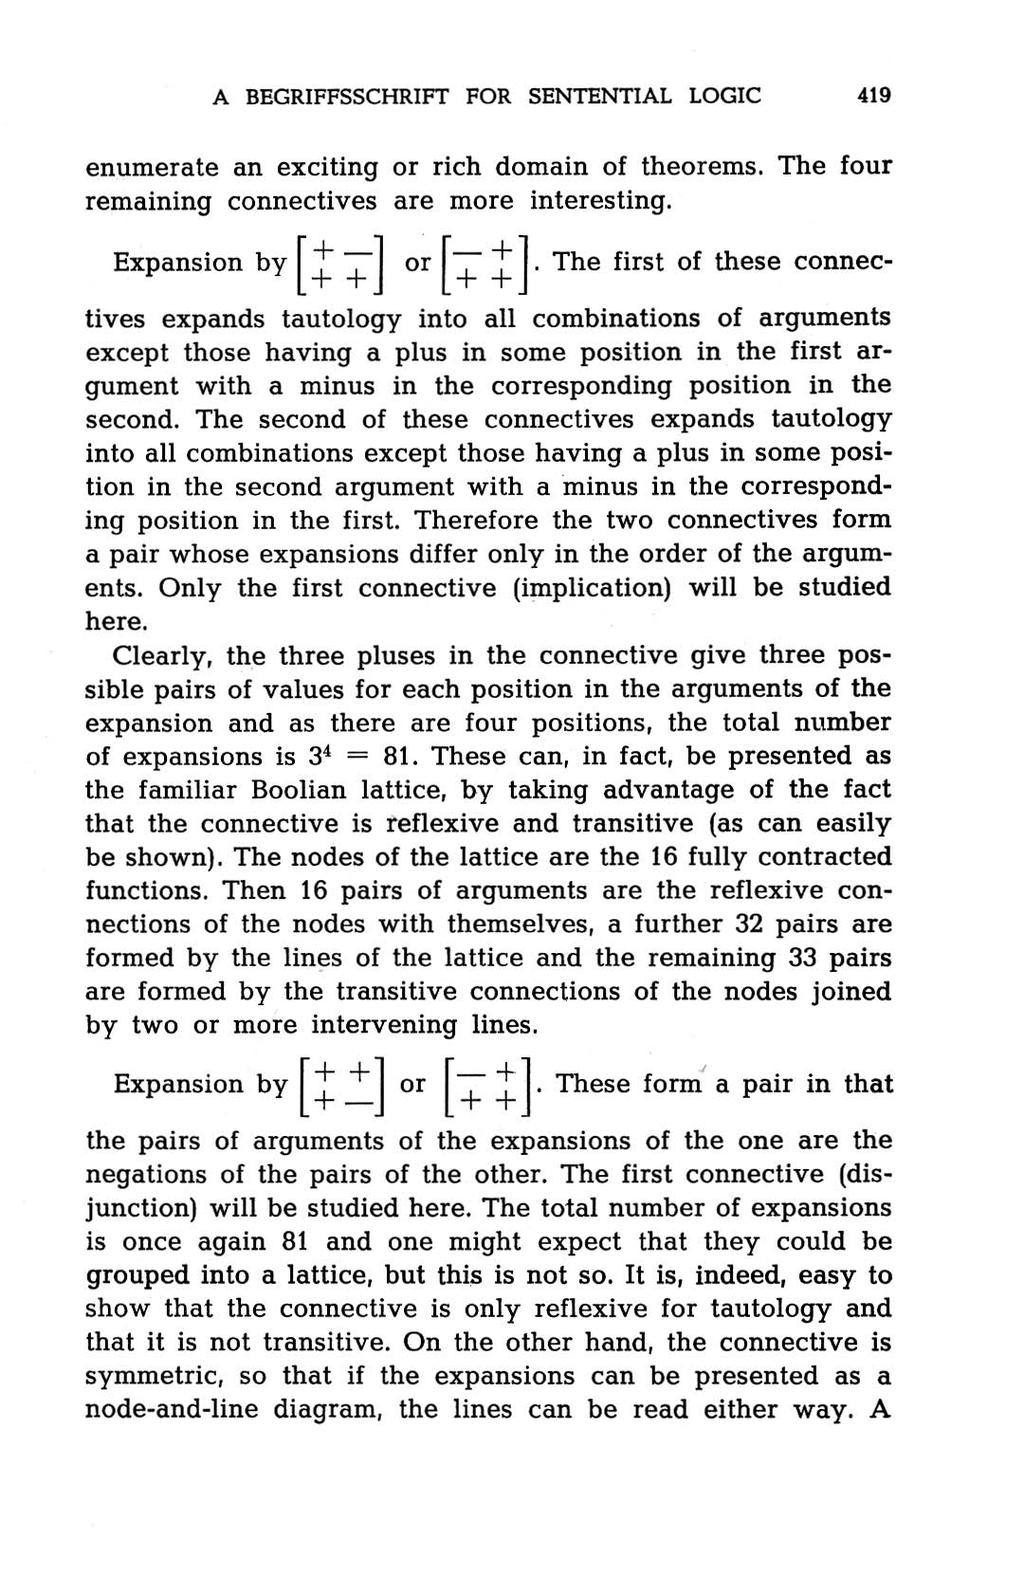 A BEGRIFFSSCHRIFT FOR SENTENTIAL LOGIC 4 1 9 enumerate an exciting o r rich domain o f theorems. The fo u r remaining connectives a re mo re interesting. Expansion b y or.